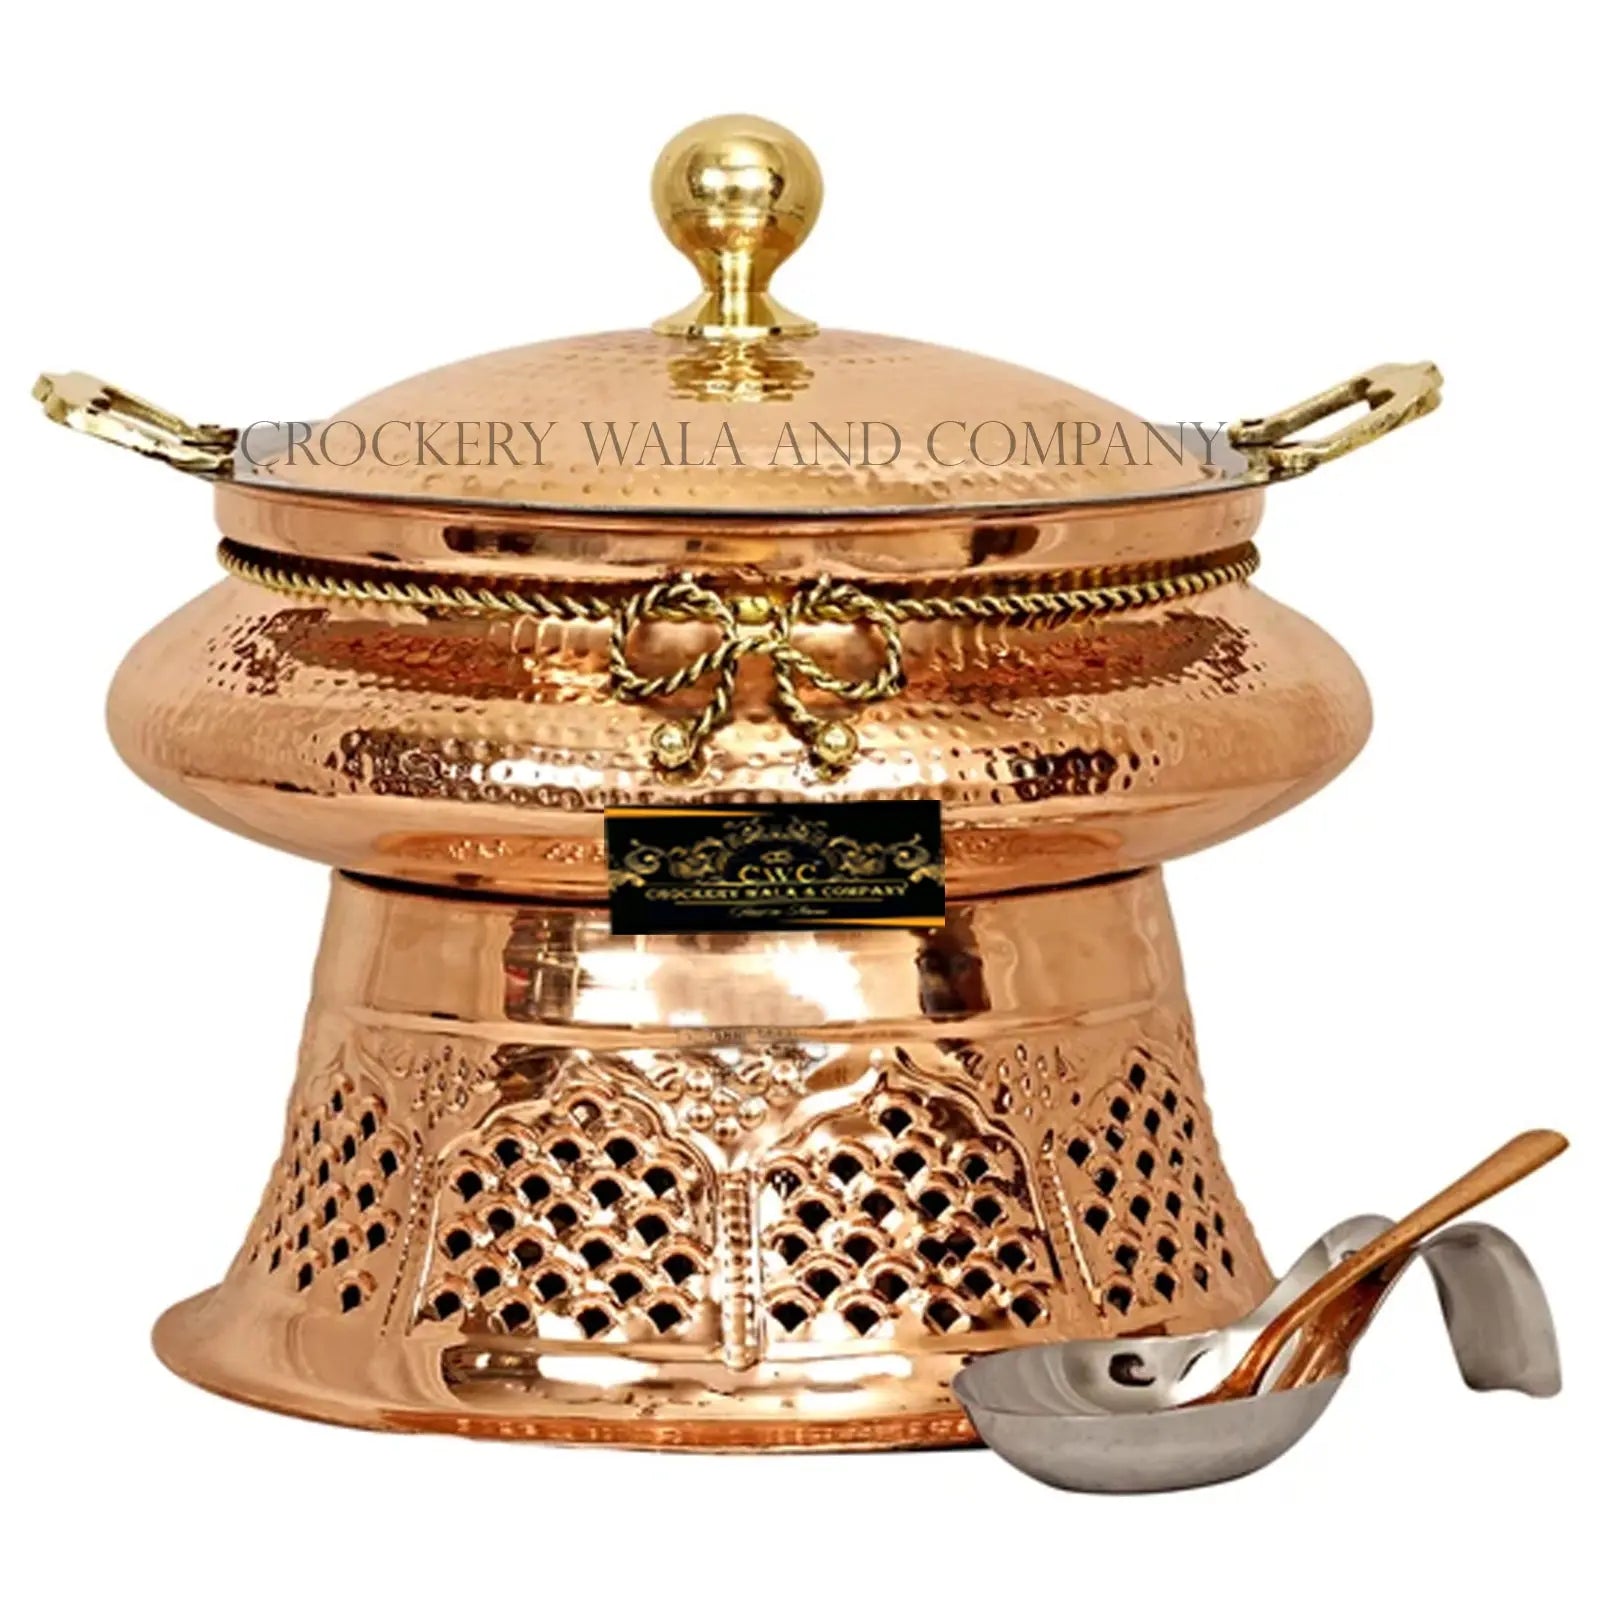 Crockery Wala And Company Copper Steel Chaffing Dish Hammered Design Chaffing Dish With Stand And Spoon 4 Liters - CROCKERY WALA AND COMPANY 